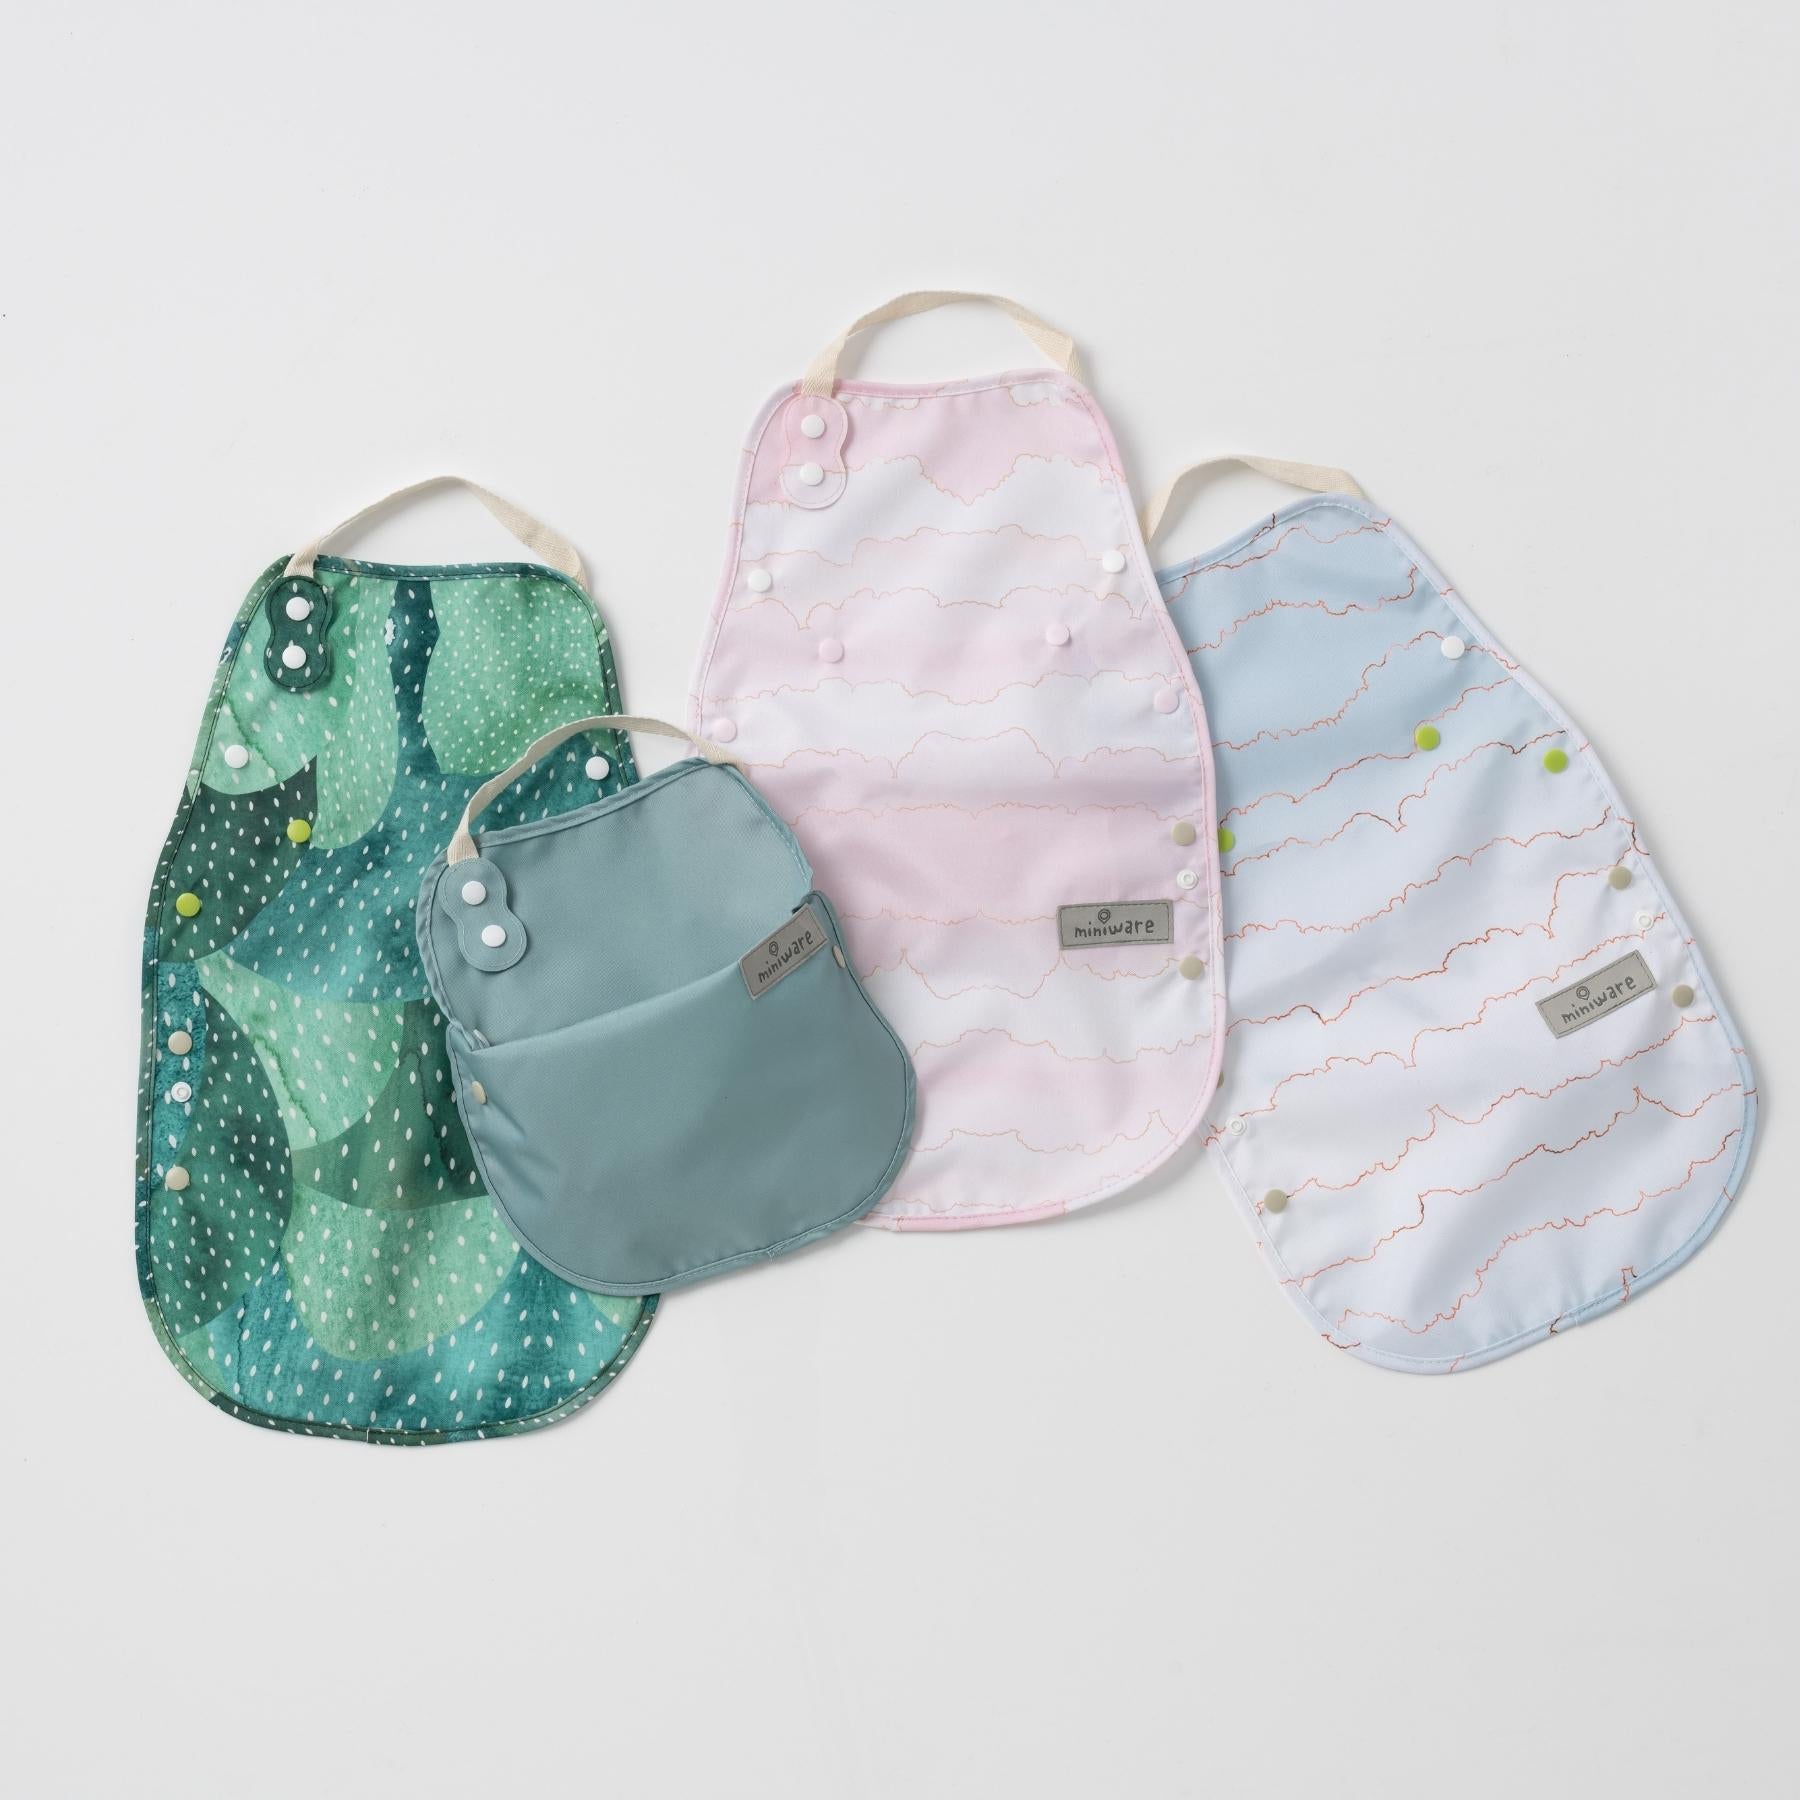 Catch & Cover bib in four pattern options!